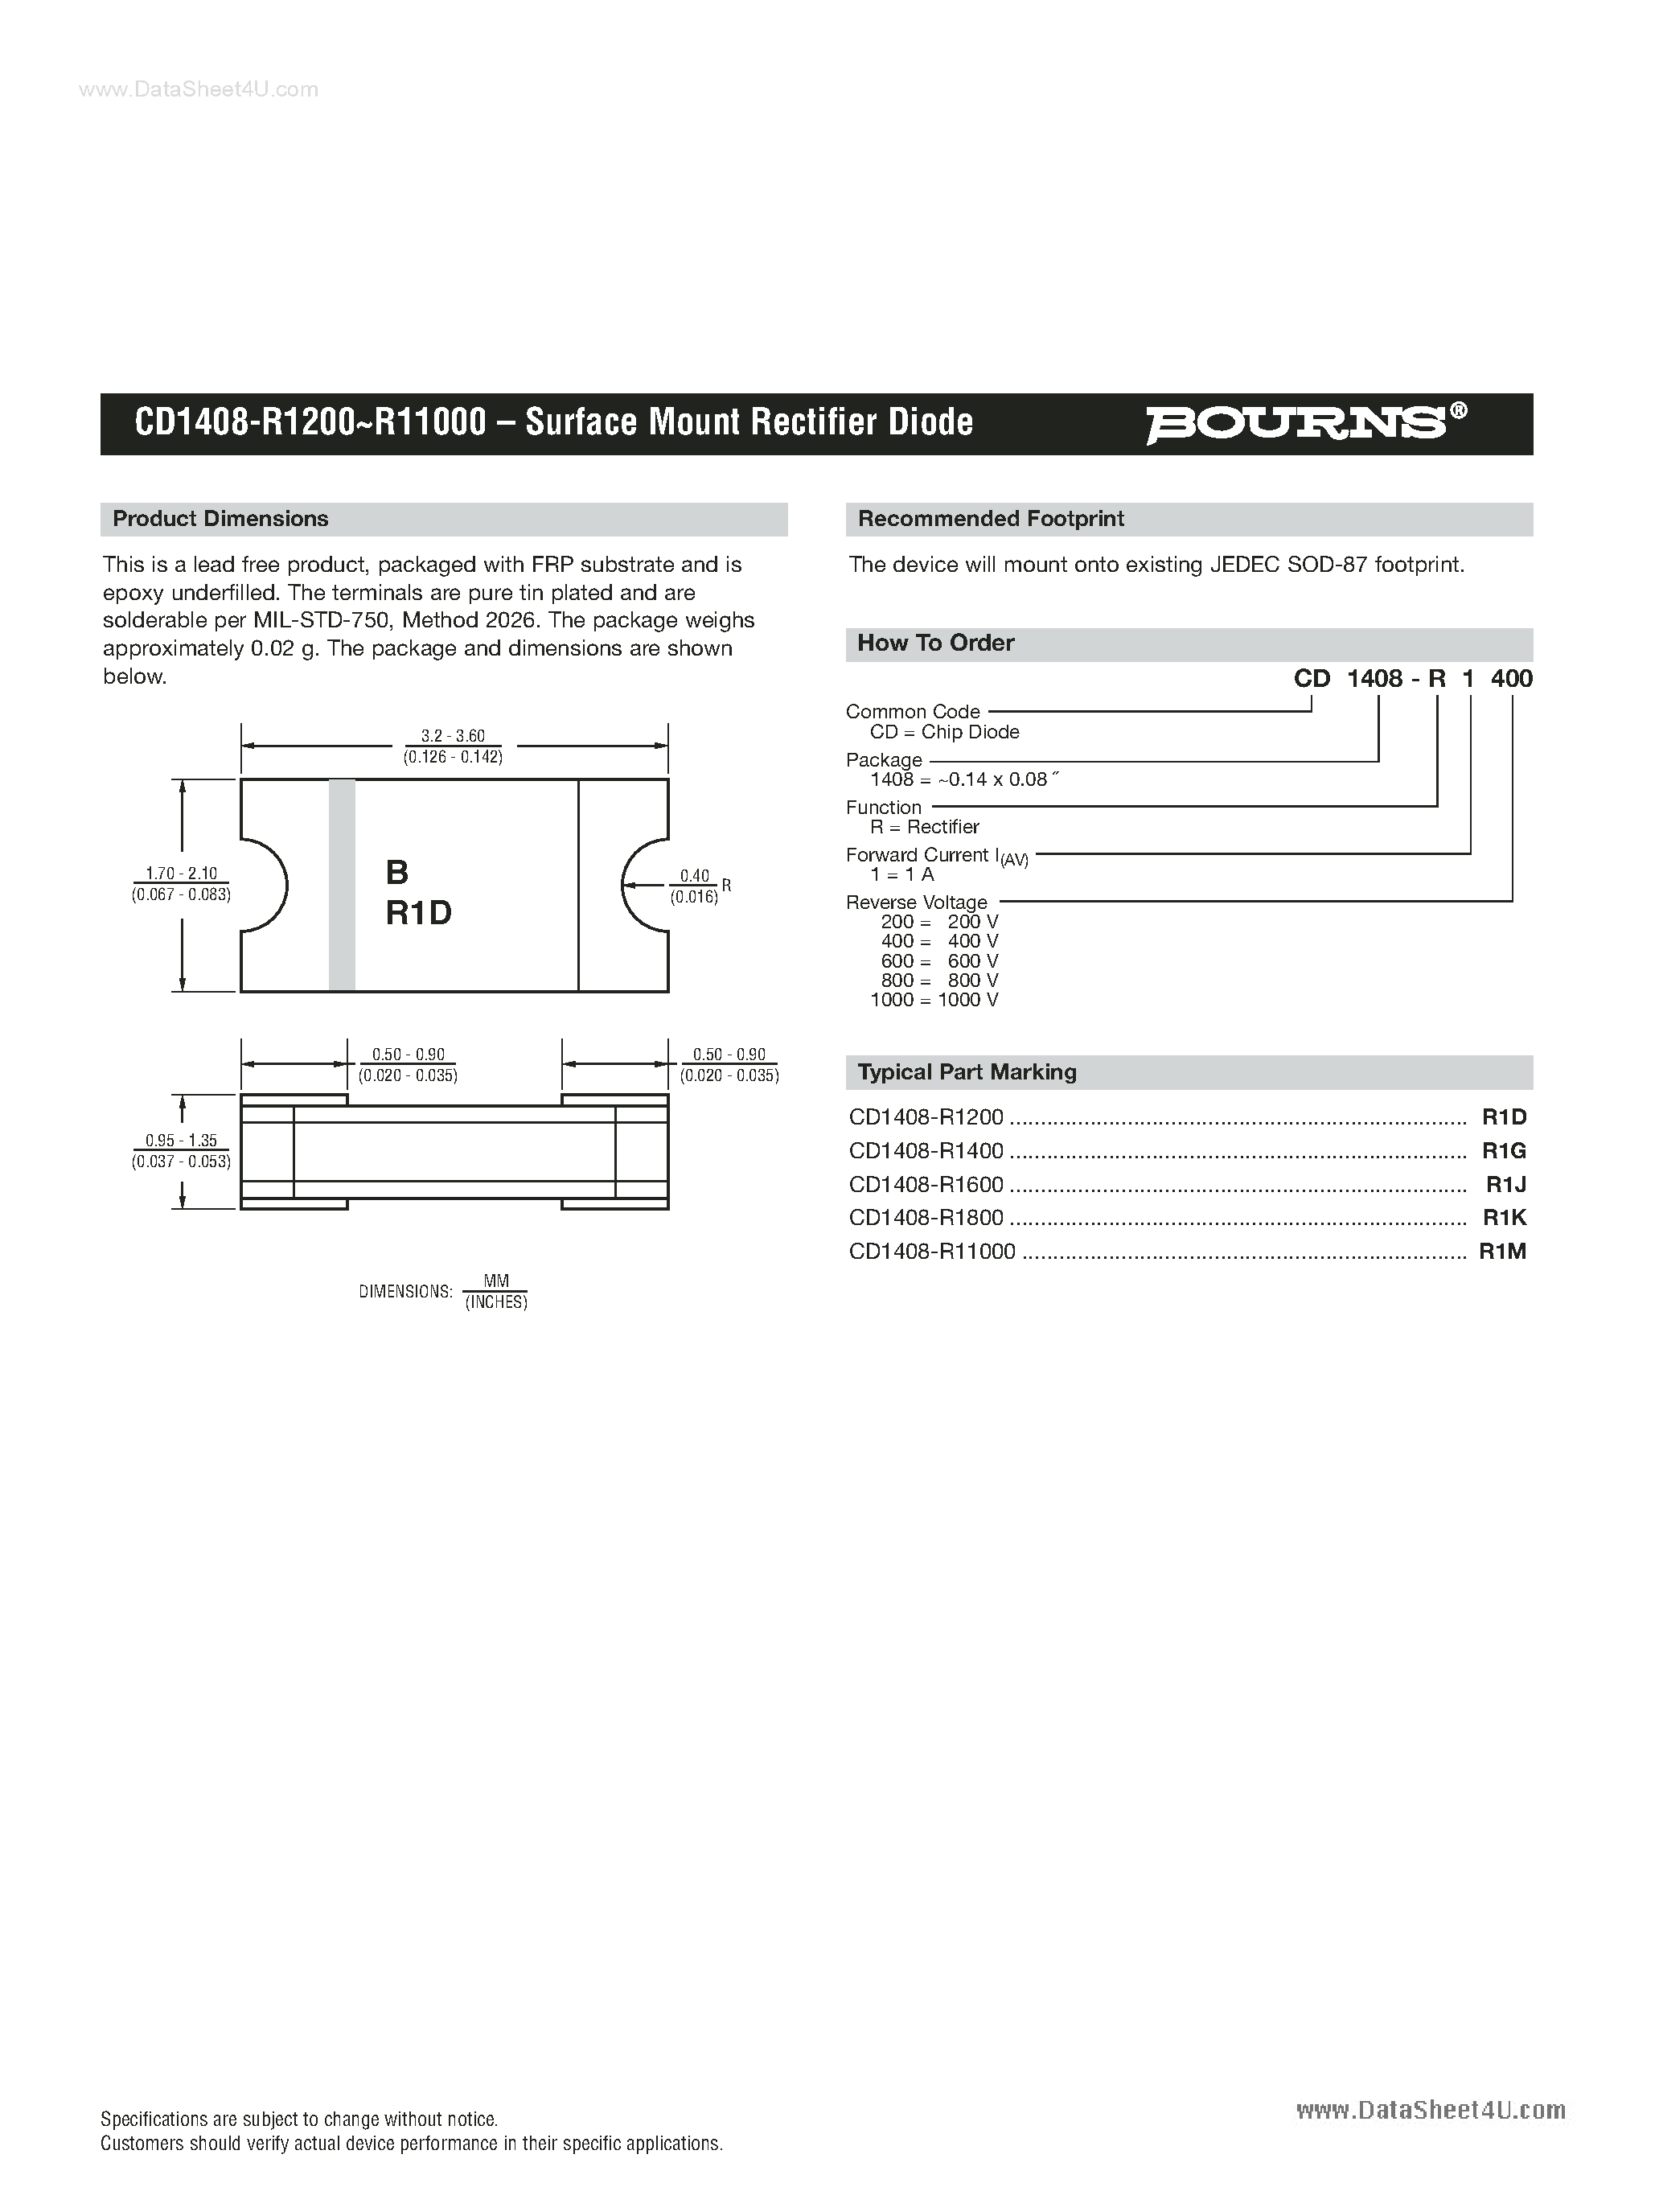 Даташит CD1408-R1x00 - Surface Mount Rectifier Diode страница 2